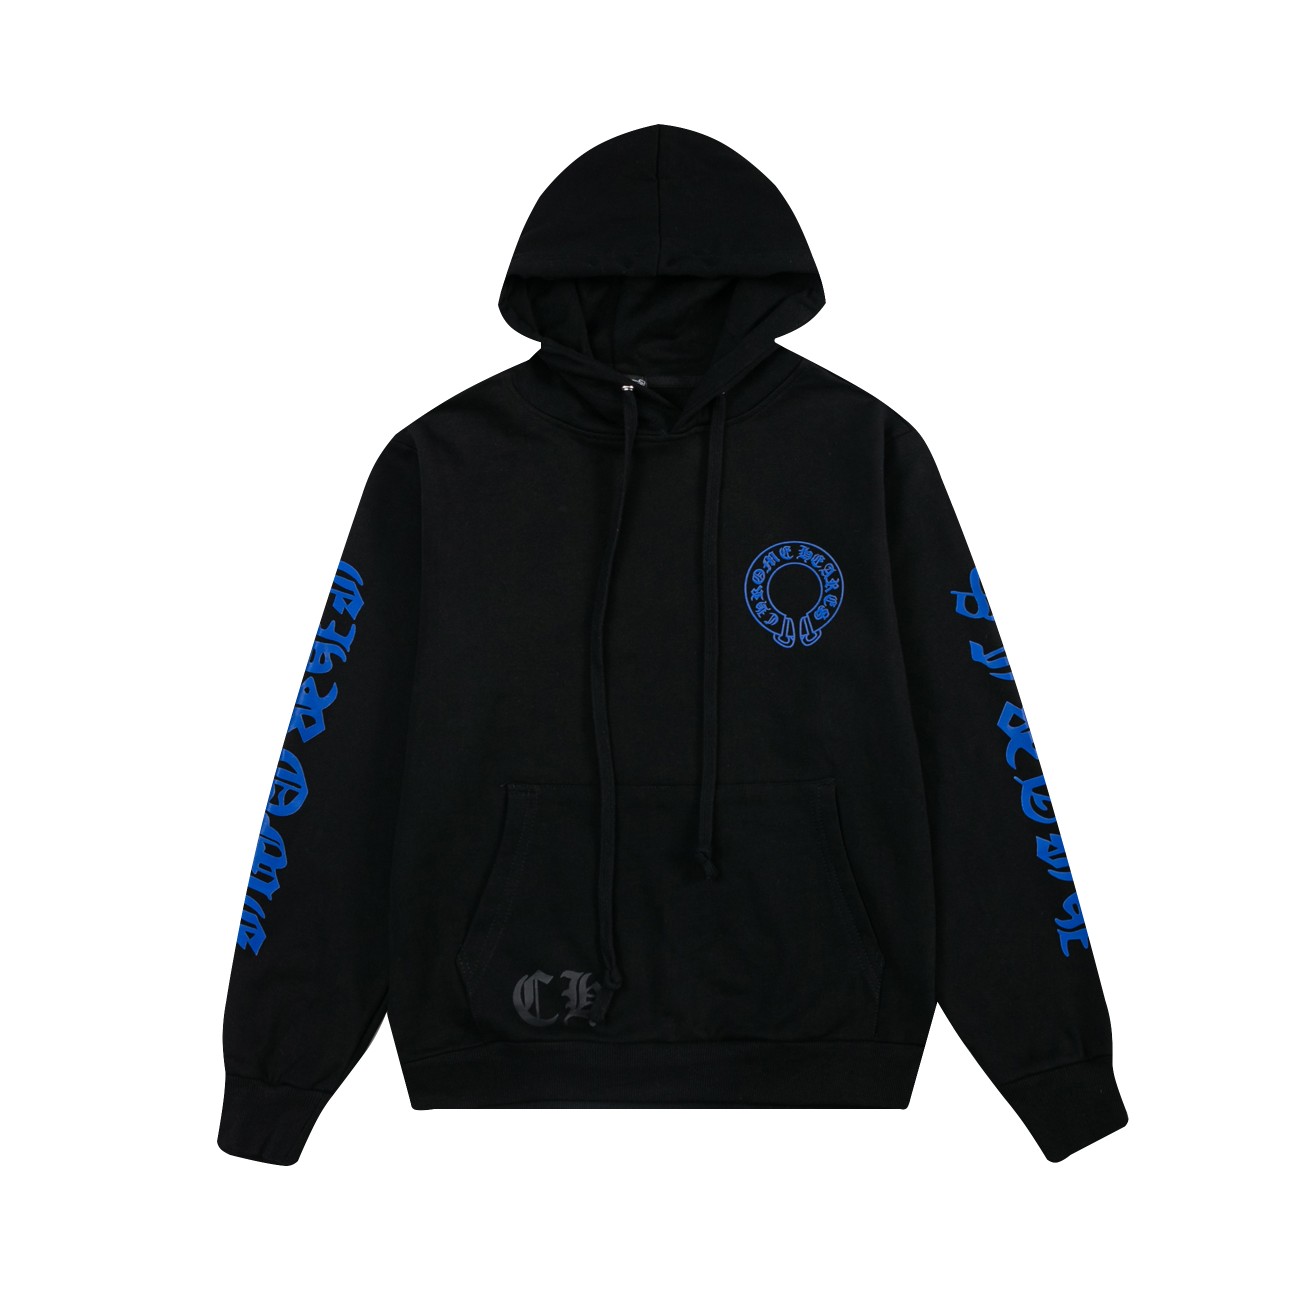 Chrome Hearts Clothing Hoodies Black Blue White Printing Unisex Cotton Hooded Top